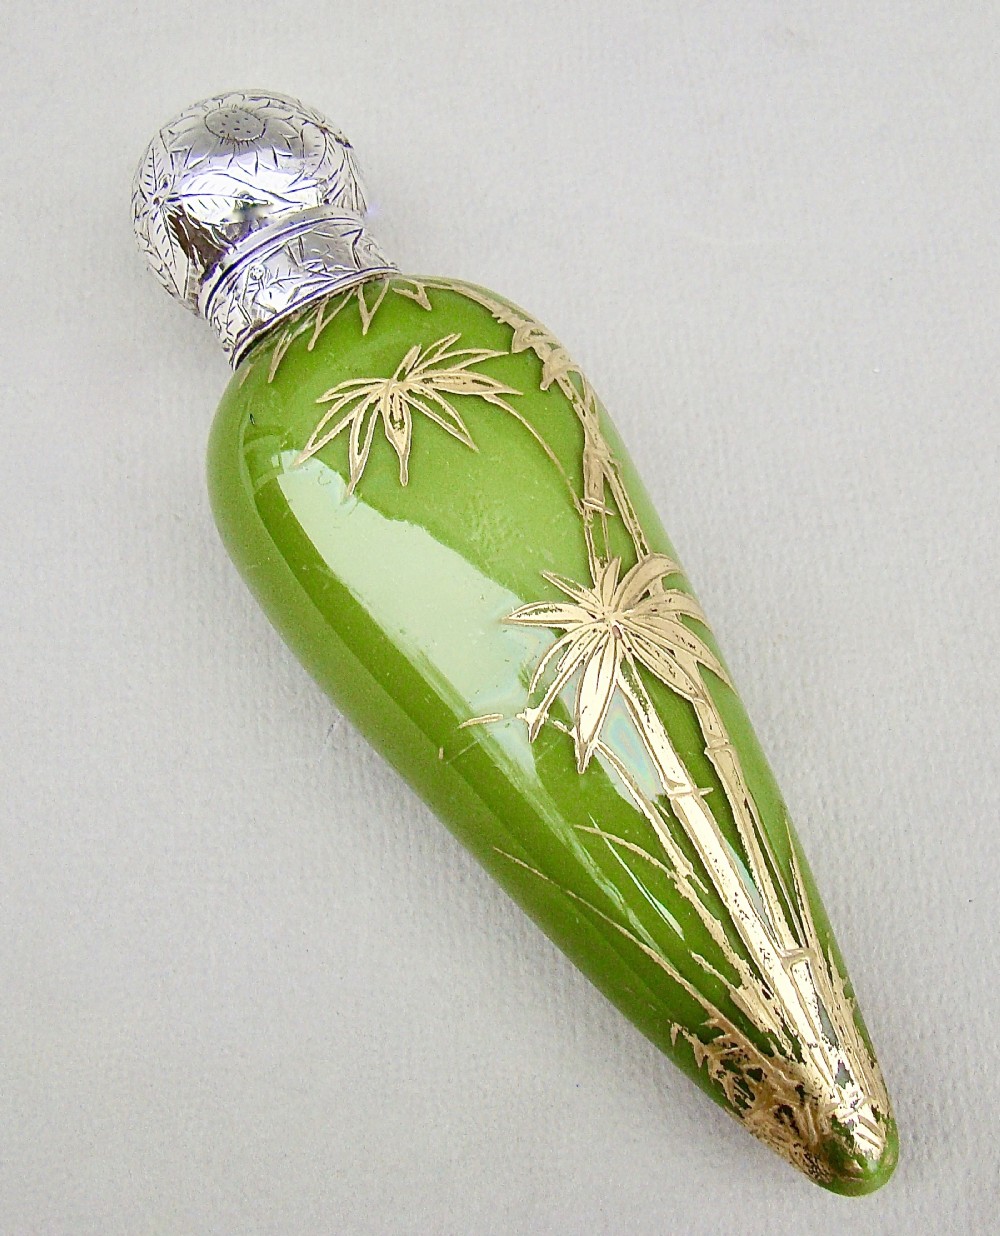 fabulous victorian aesthetic movement silver and opaline gilt glass scent bottle by hewett co birmingham 1884